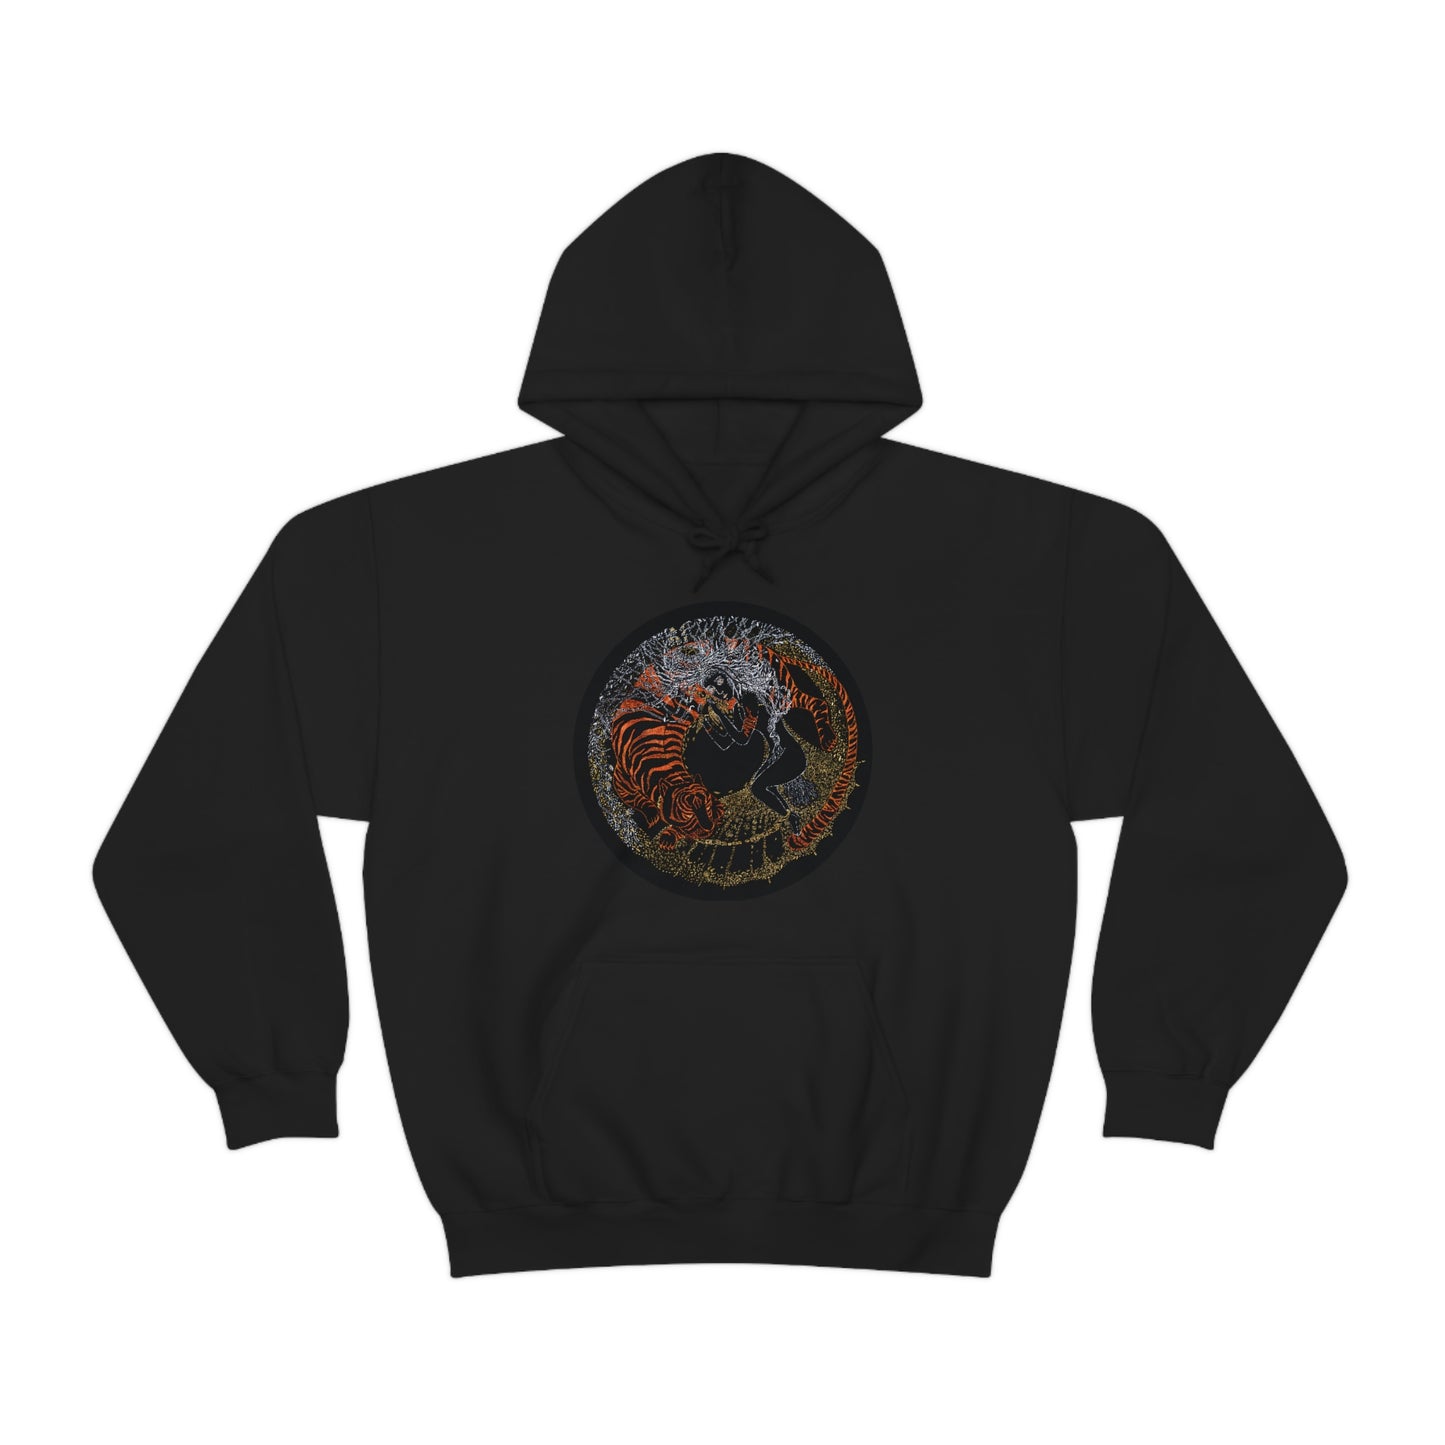 Chinese Zodiac Sign Hoodie (Tiger)